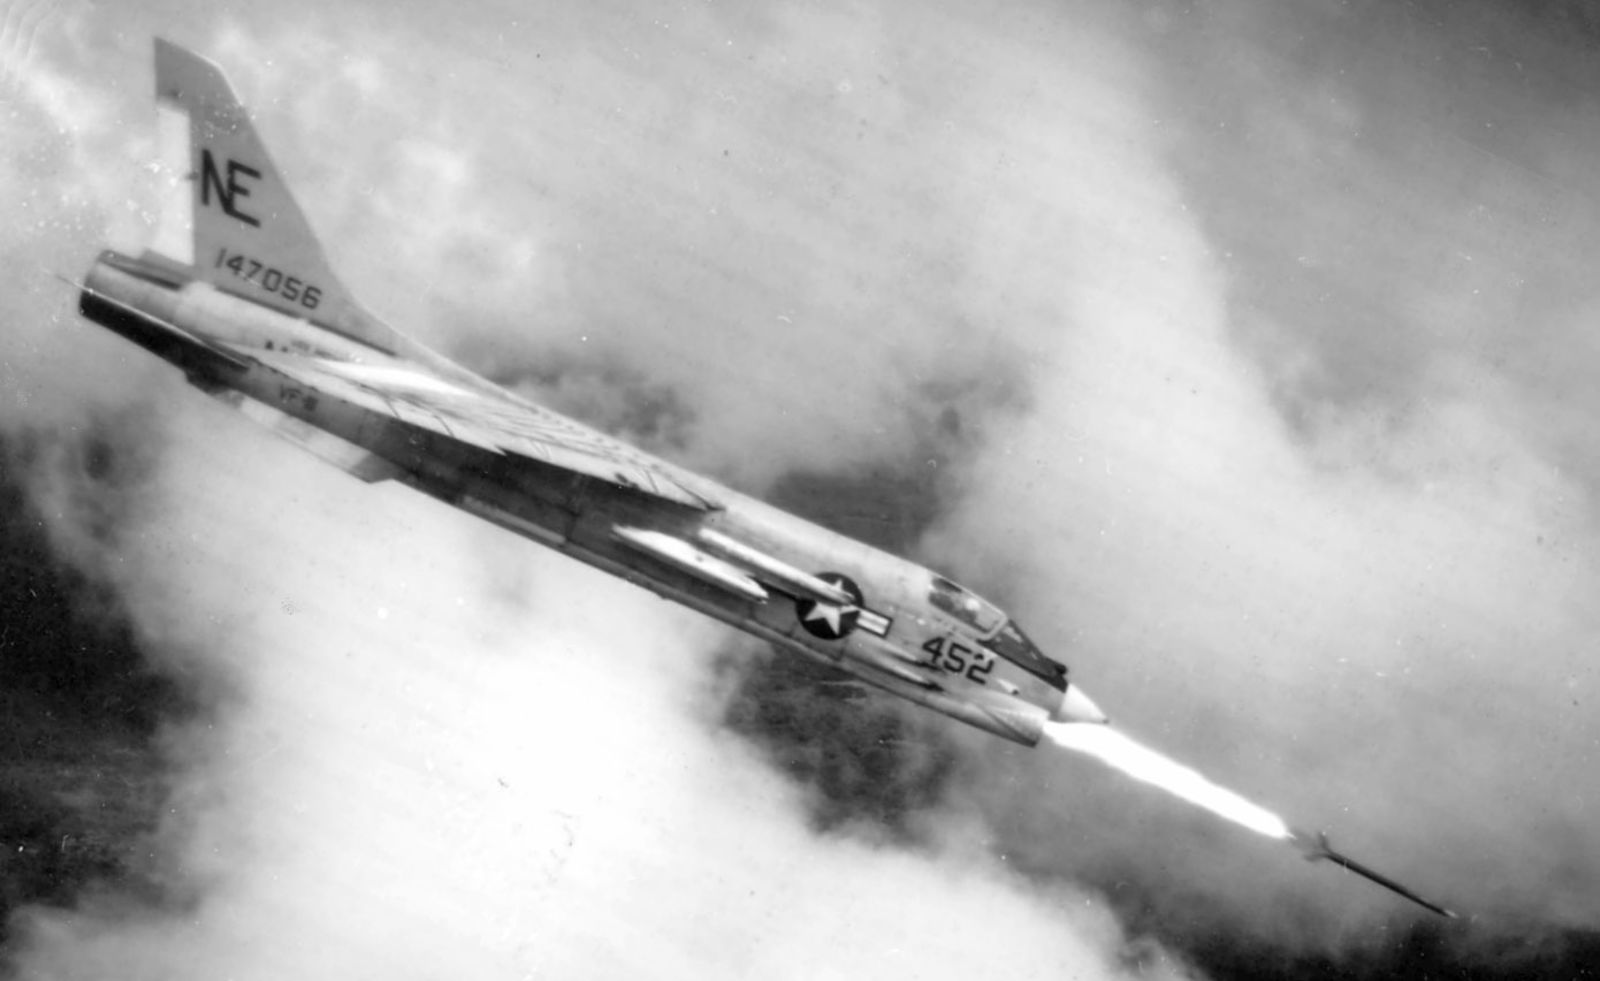 A US Navy F-8D Crusader of Fighter Squadron VF-111 “Sundowners” fires a Zuni rocket over South Vietnam in 1965. (US Navy)